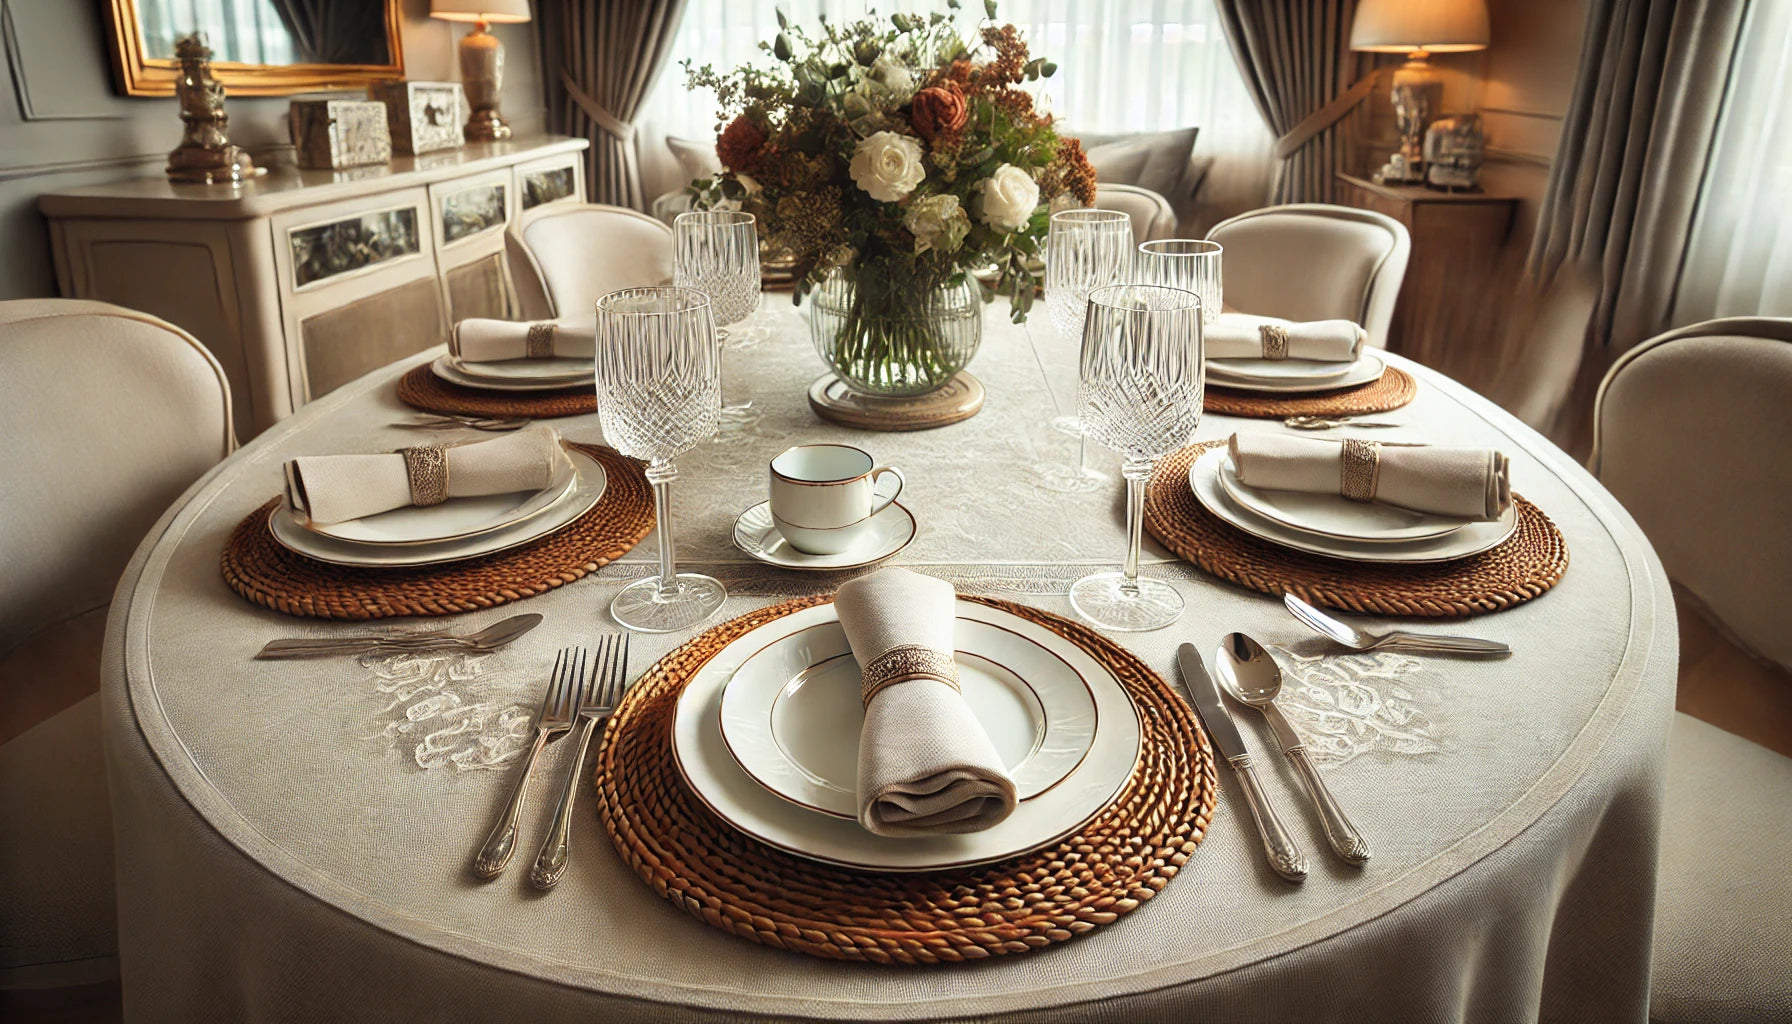 An elegantly set dining table with oval-shaped placemats made of woven natural fibers, light-colored tablecloth  and a centerpiece with fresh flowers in a cozy dining room ambiance.